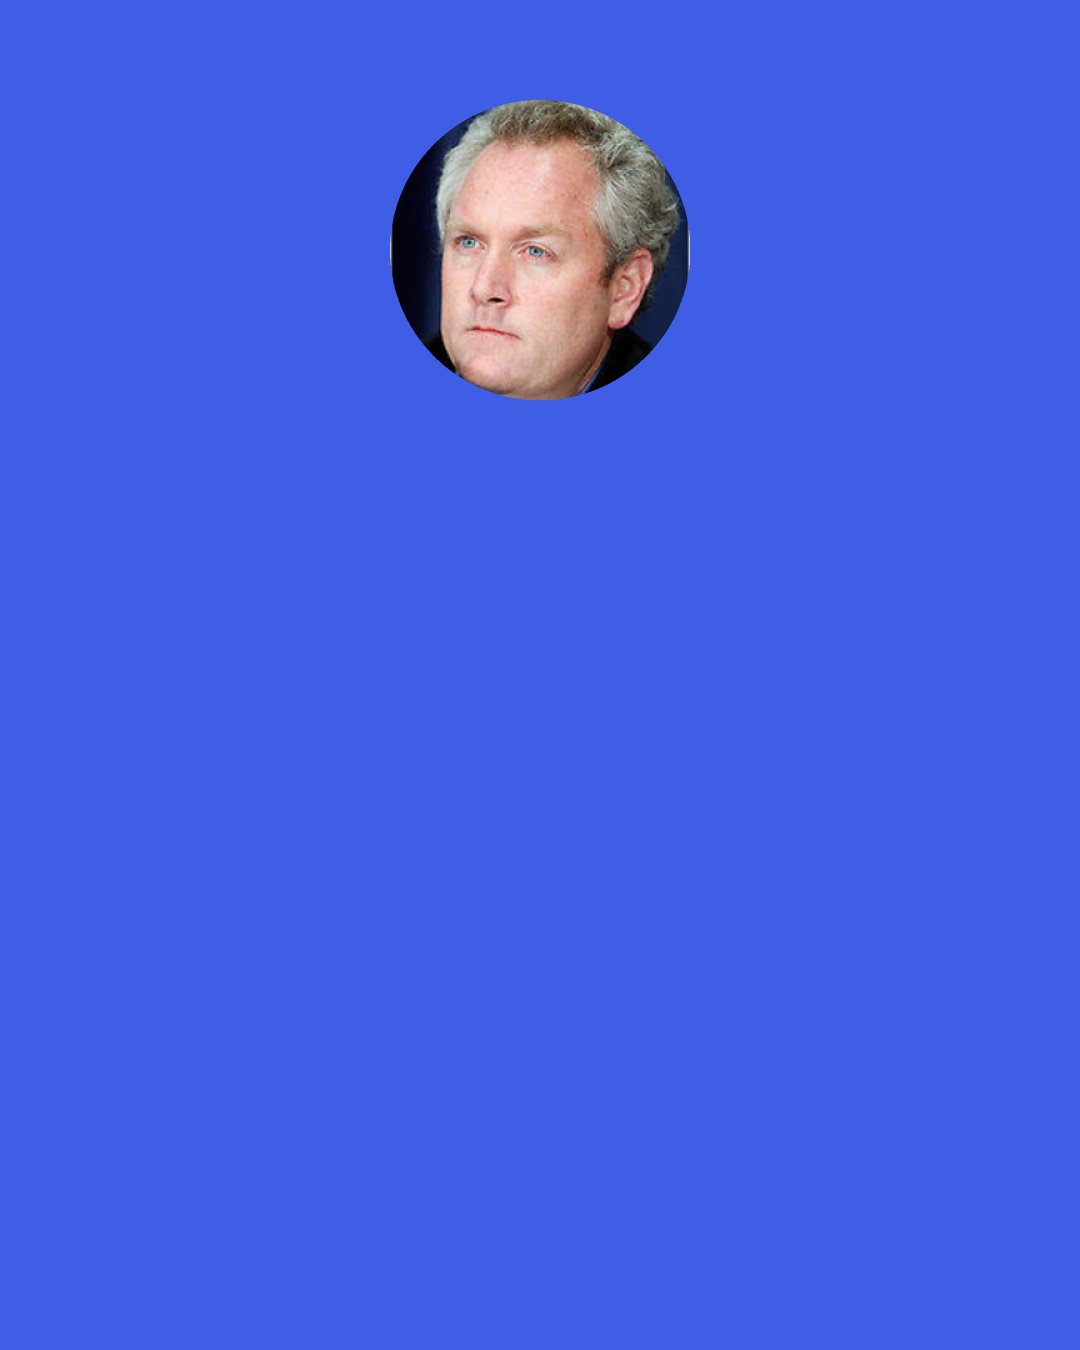 Andrew Breitbart: I love Latino culture but I hate the concept of "la raza." It is a divisive mindset.